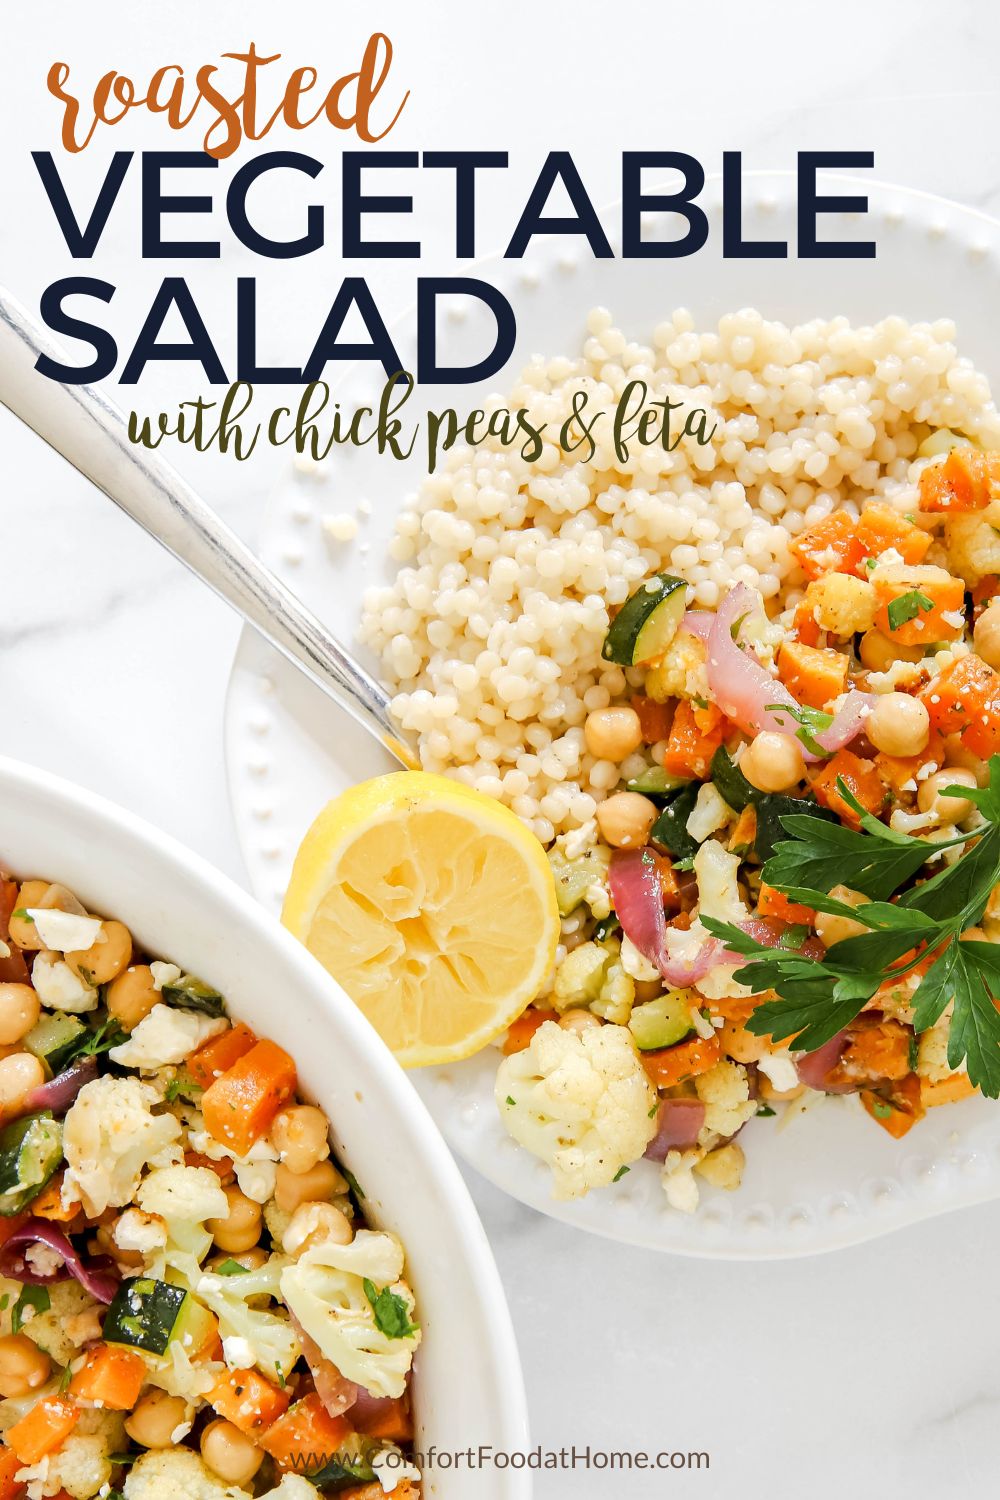 roasted vegetable salad with chickpeas and feta cheese